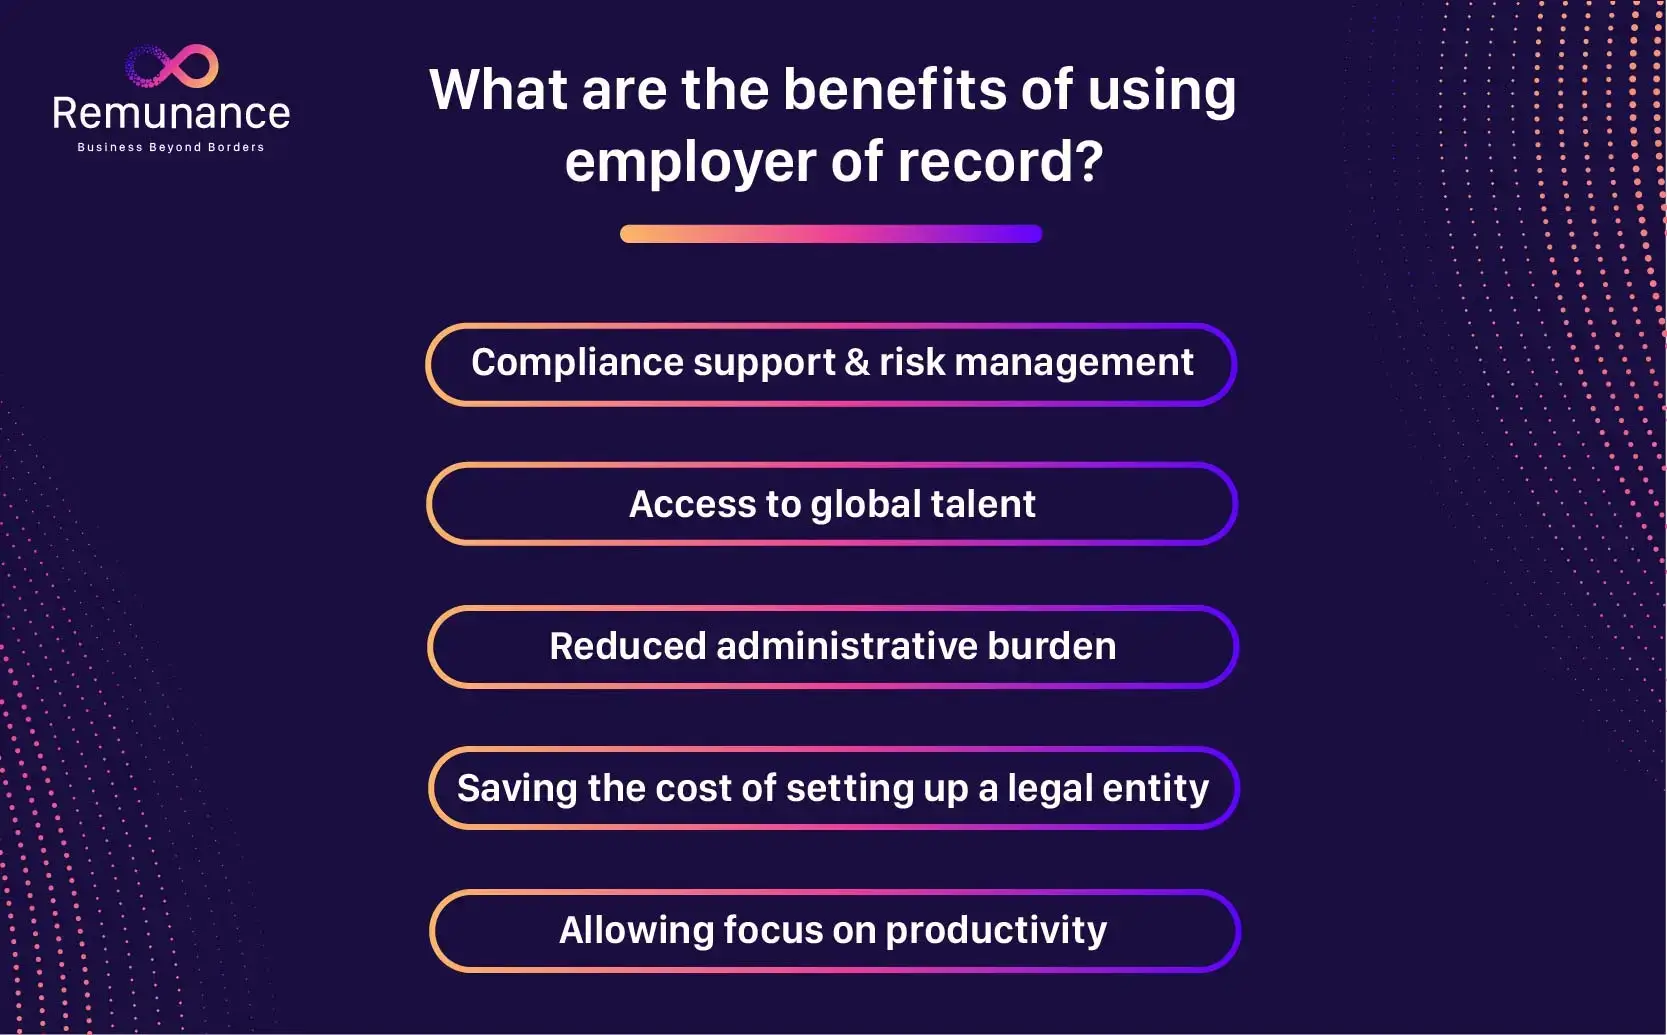 Benefits of an Employer of Record